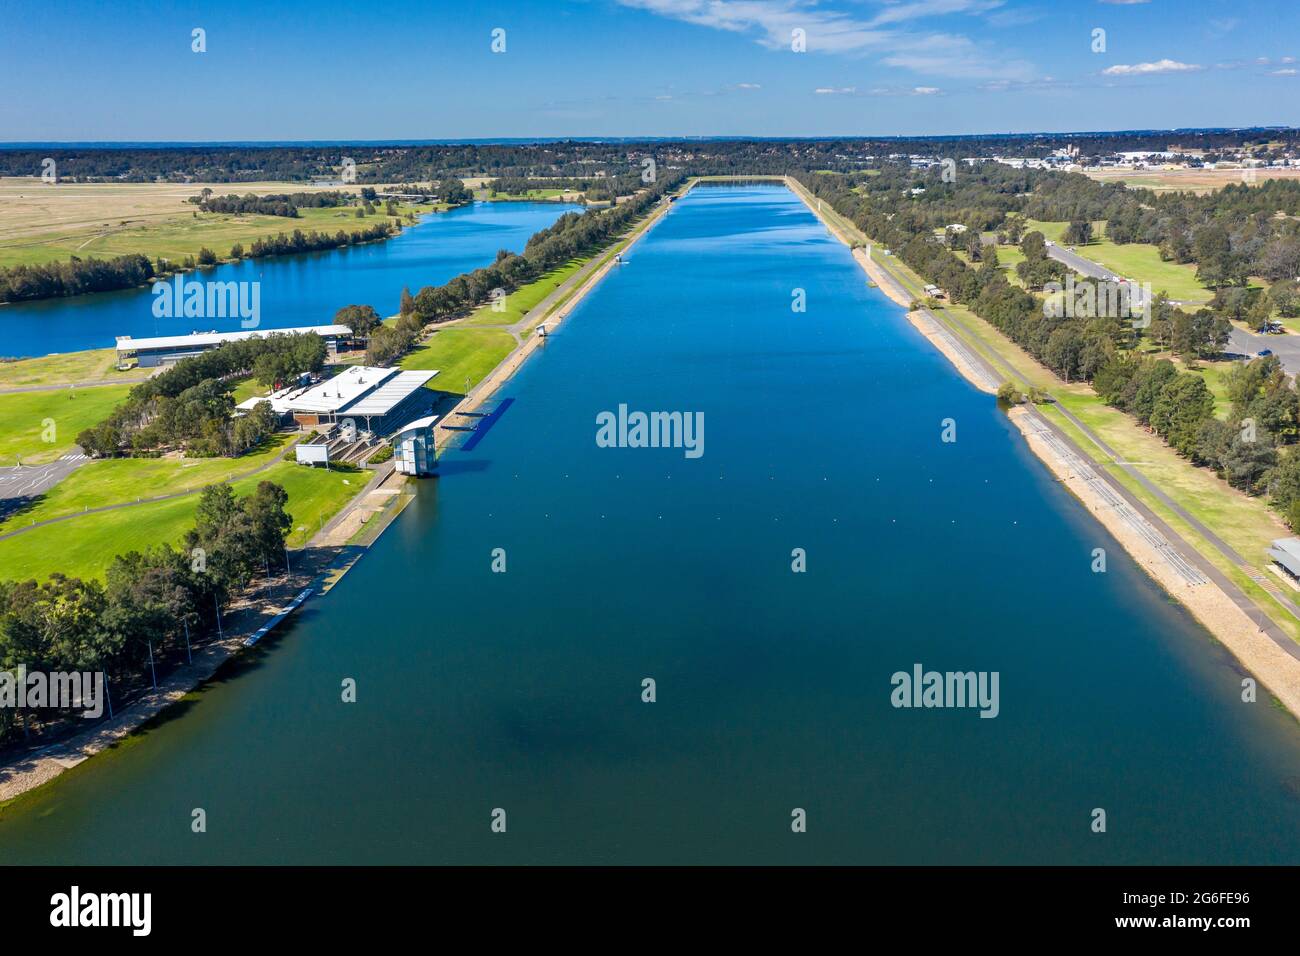 Aerial view of blue water at a rowing centre surrounded by green agricultural fields in regional Australia. Stock Photo